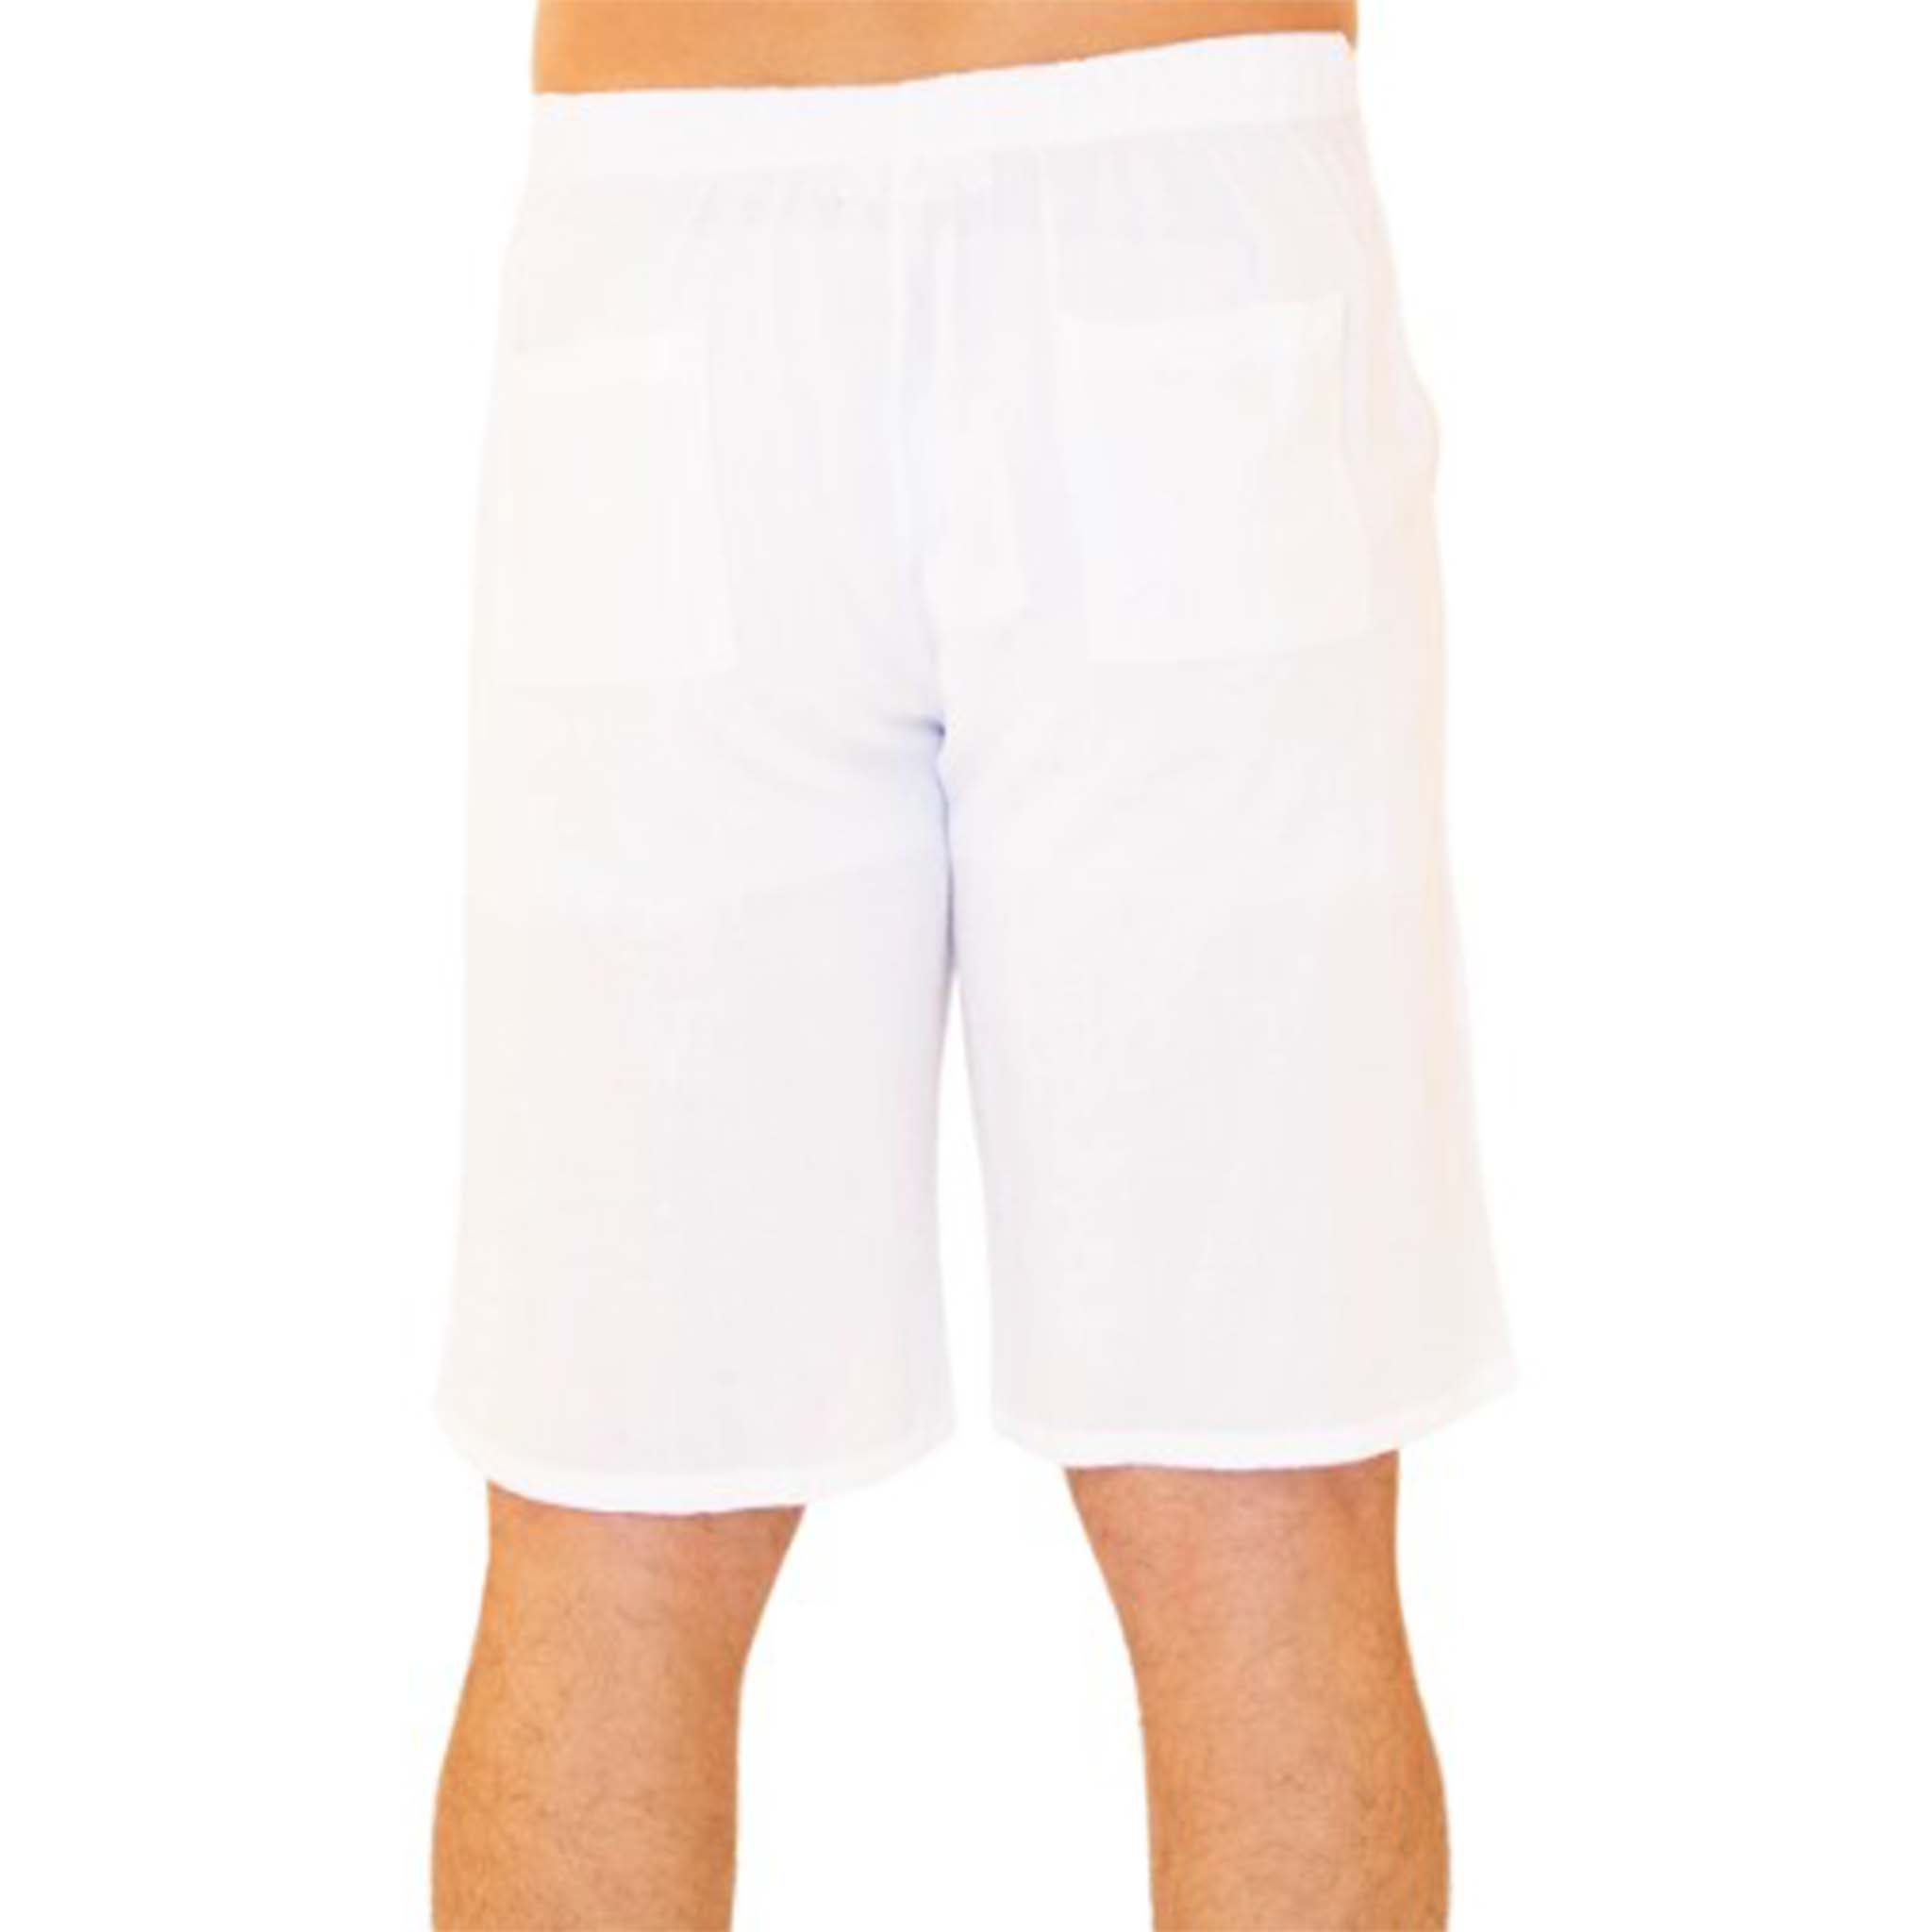 Men's White Vacation Shorts - Tailored fit with a modern silhouette that can be dressed up or down, perfect for any vacation outfit.